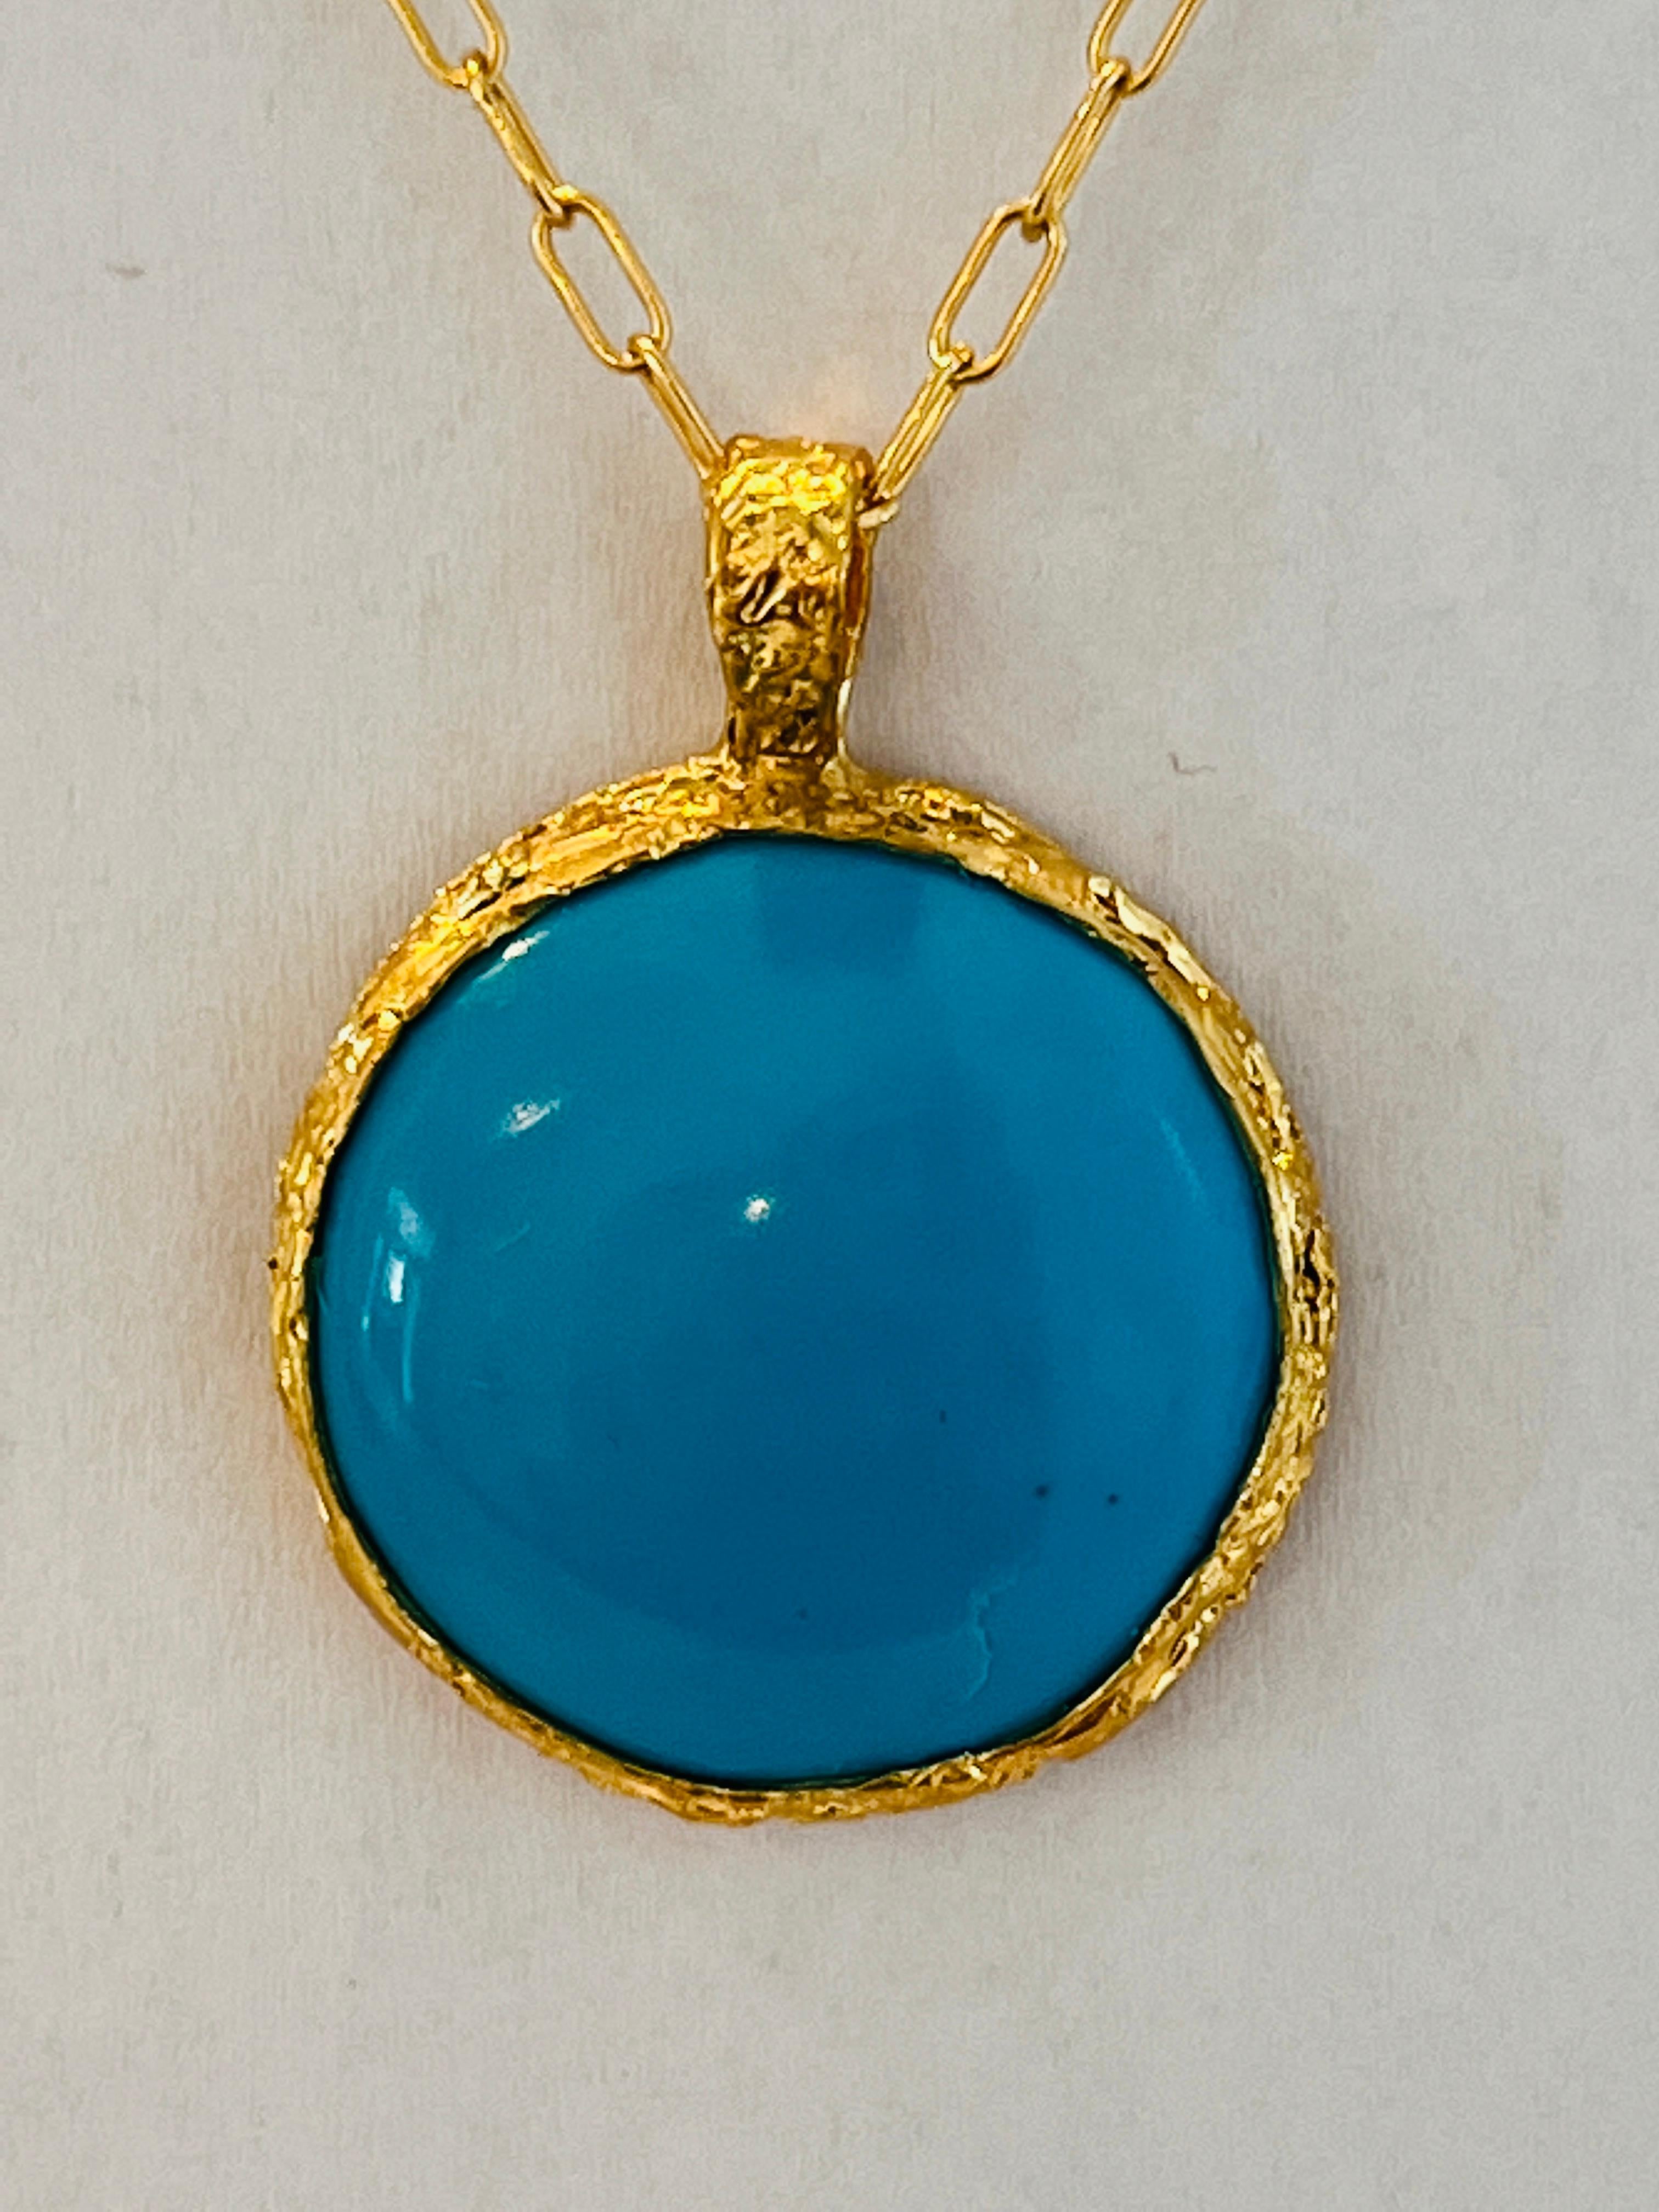 Women's Turquoise Handmade Pendant in 22k Gold, by Tagili